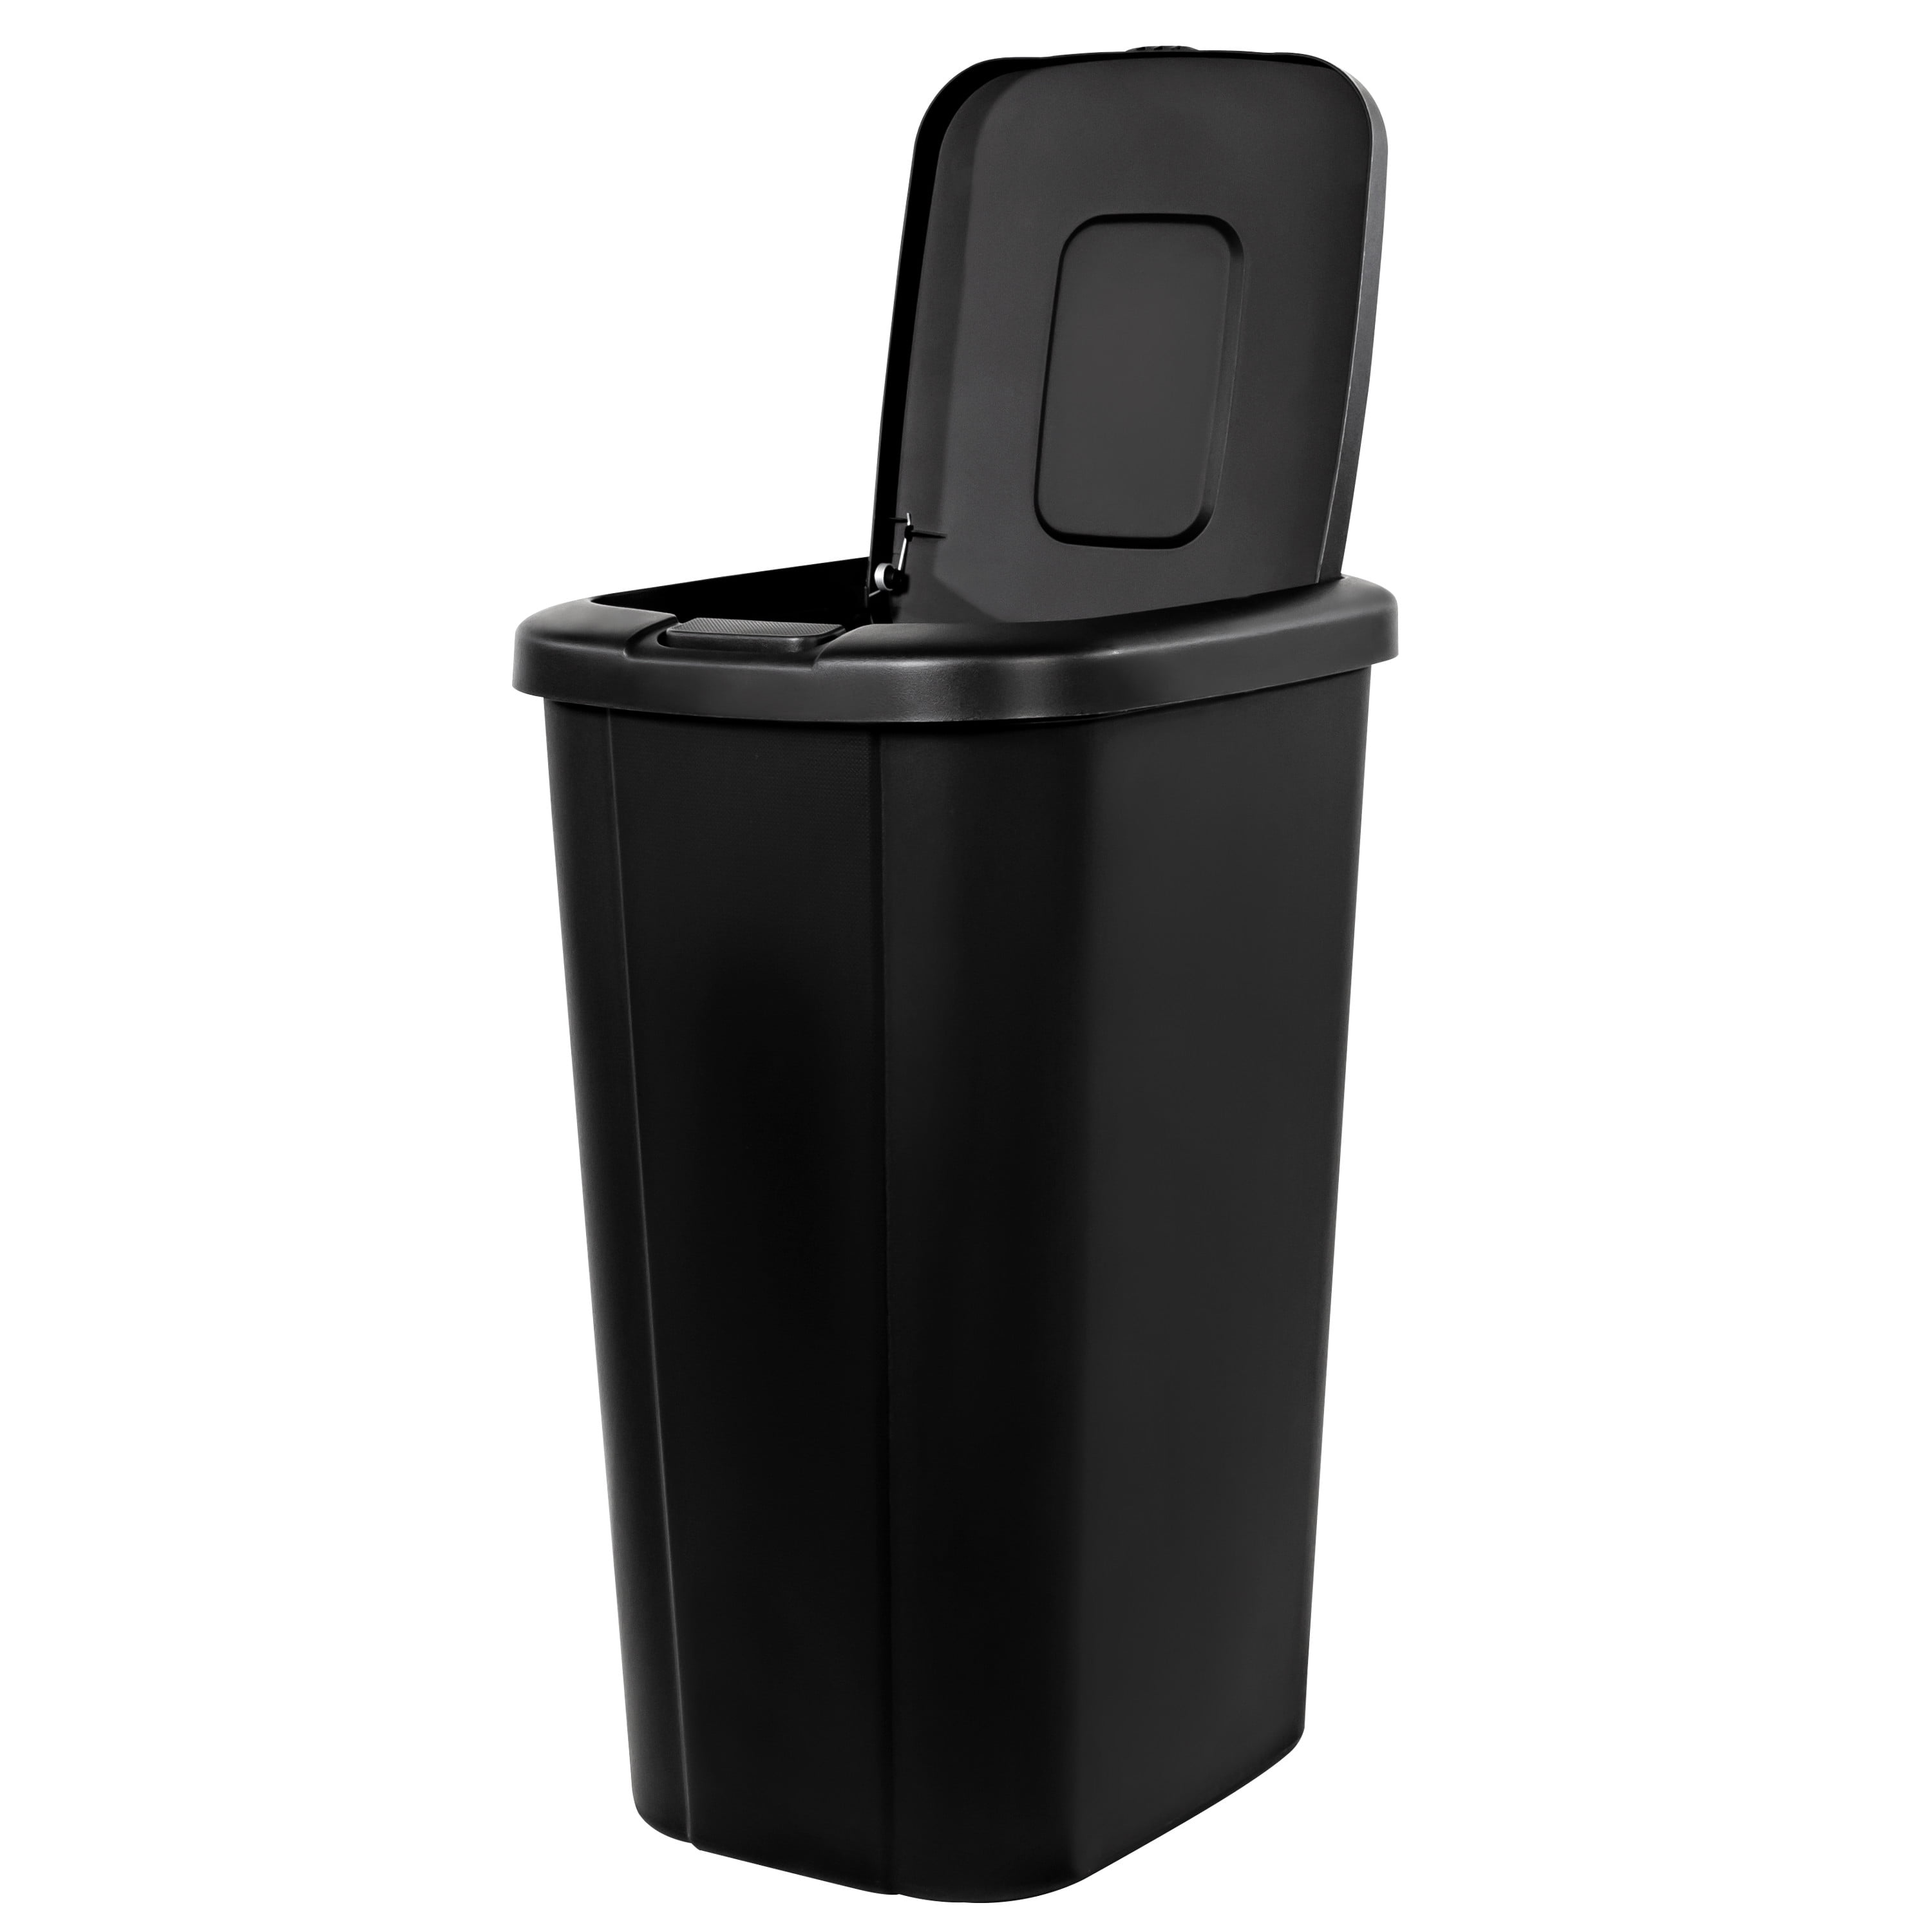 What Features to Look for when Buying Bathroom Waste Bins - Intelligent  Hand Dryers -Blog